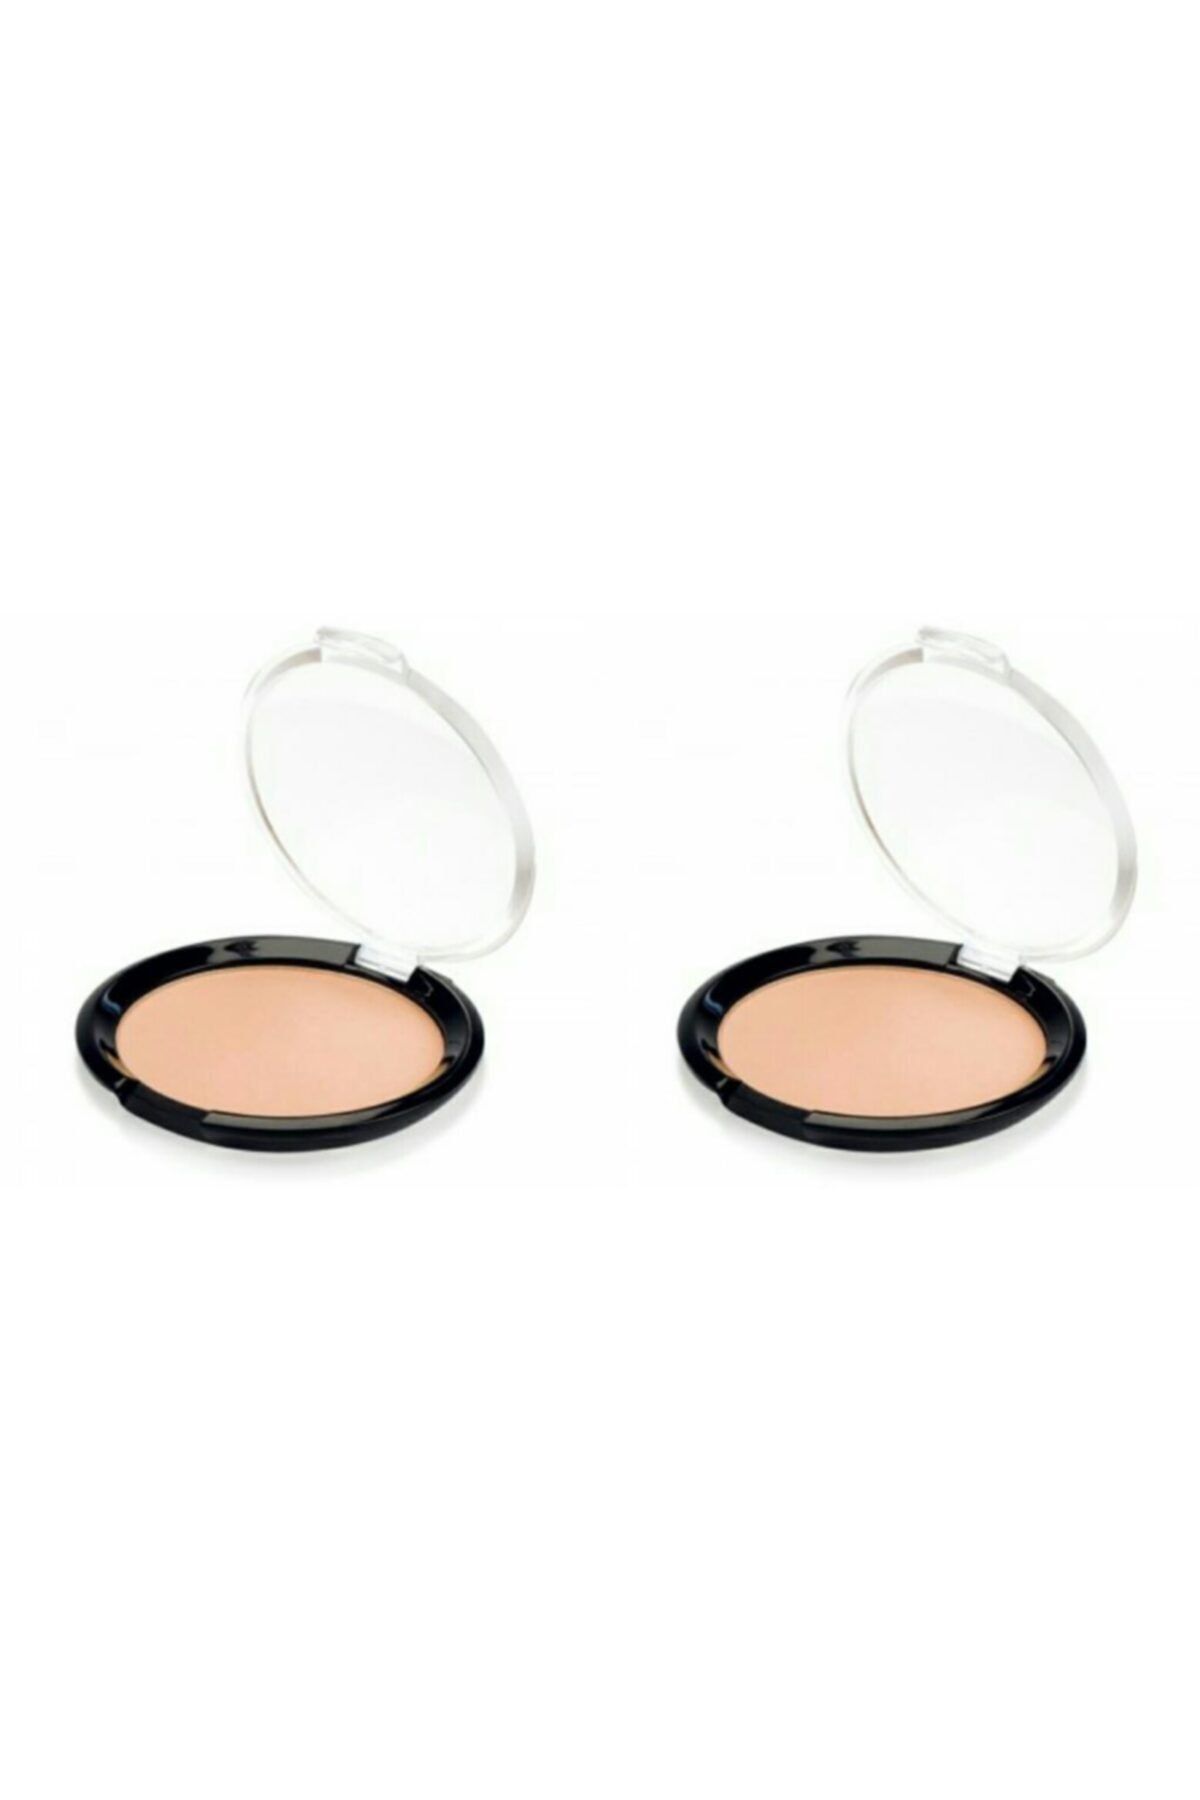 Golden Rose Silky Touch Compact Powder No:05 2'li Pudra 8691190115052